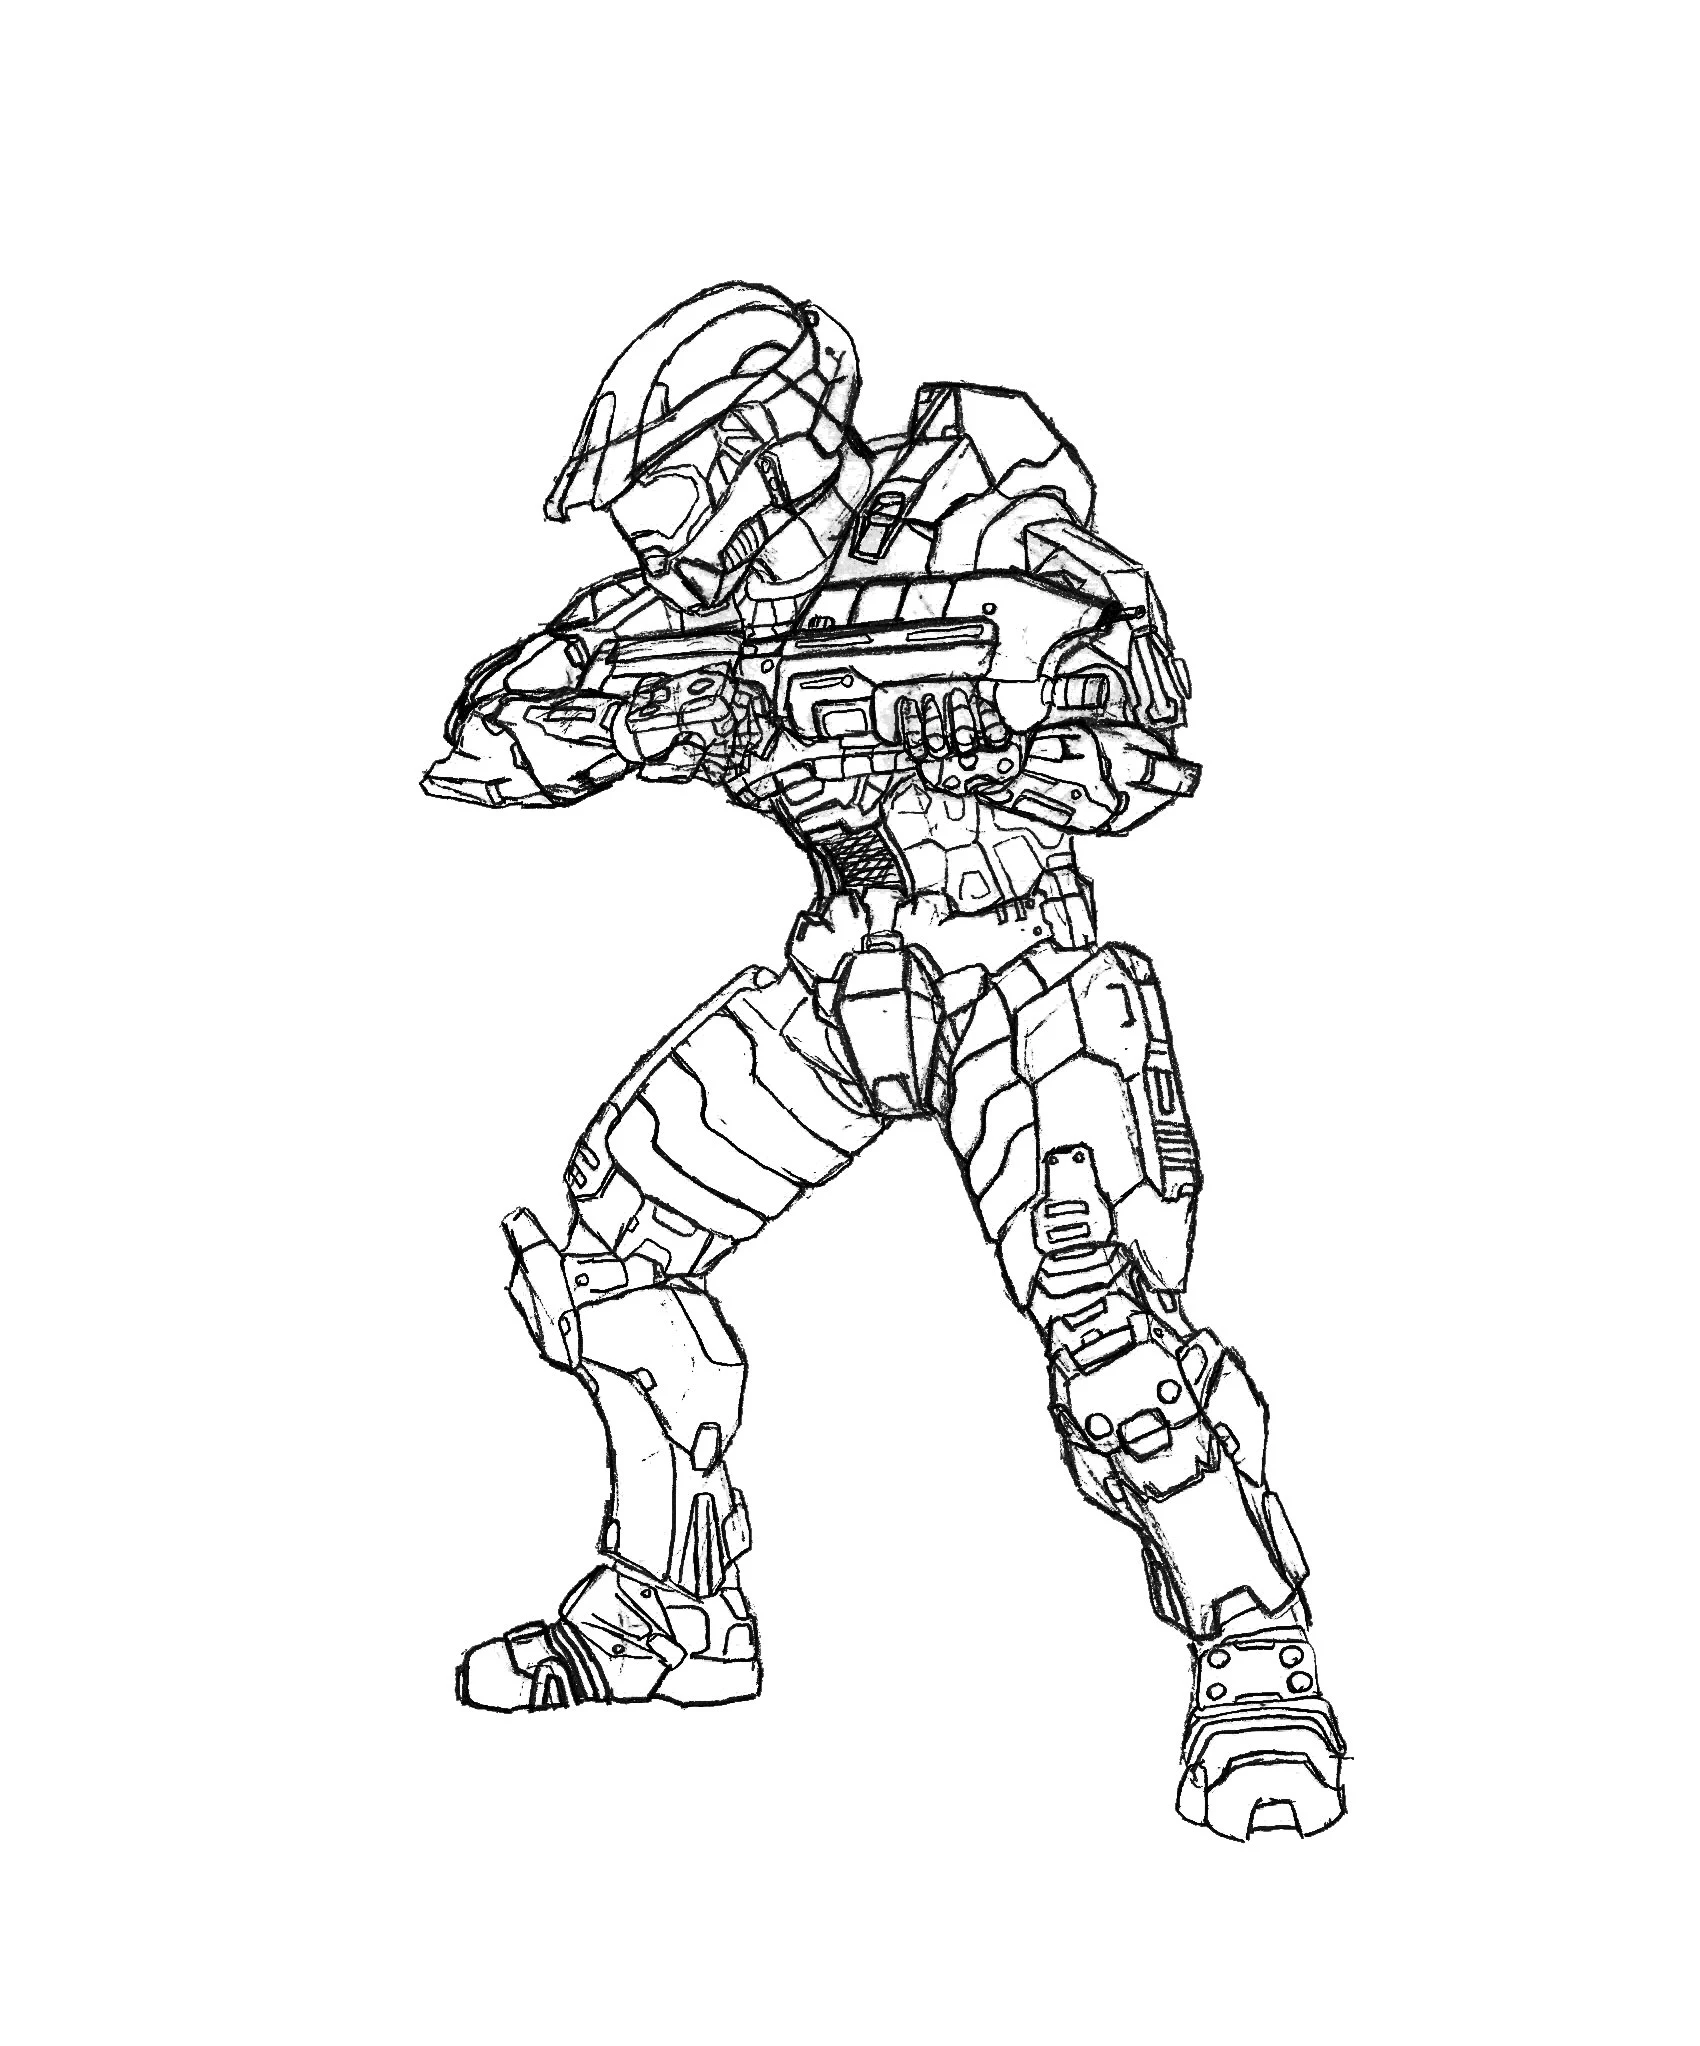 Halo Infinite Coloring Pages Halo Spartan Coloring Pages at